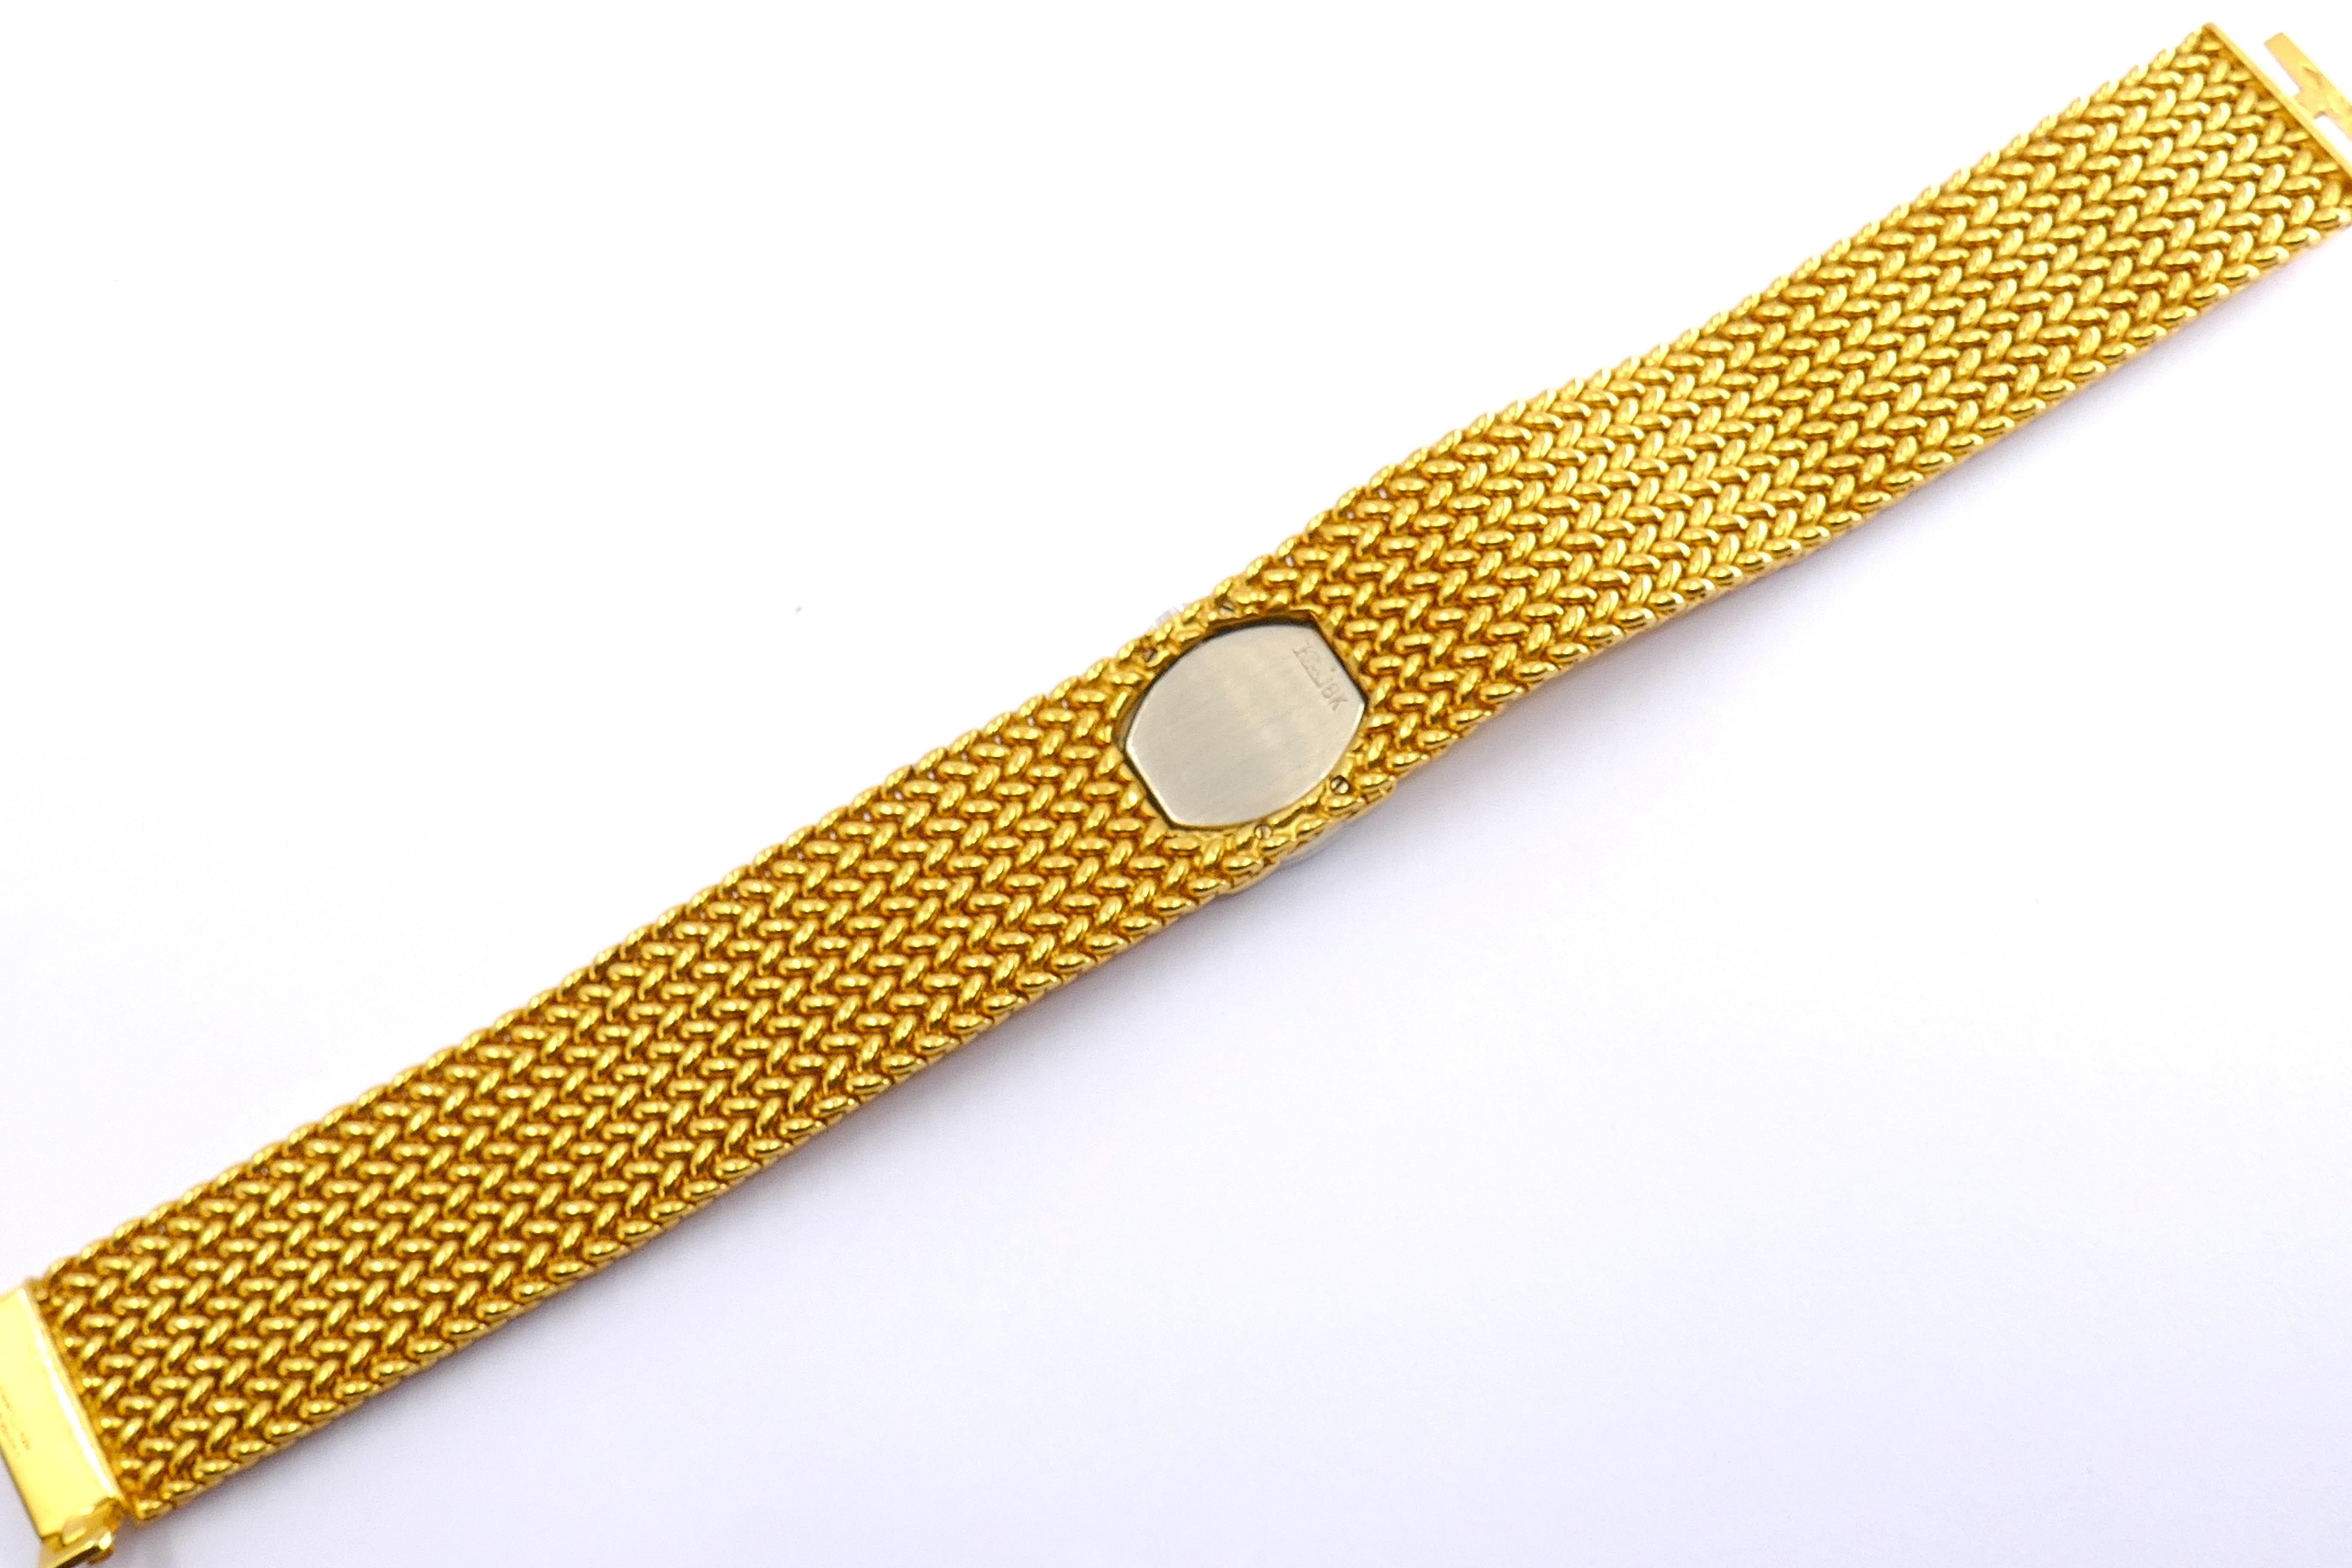 Vintage Cartier 18k Gold Diamond Braided Watch For Sale 3